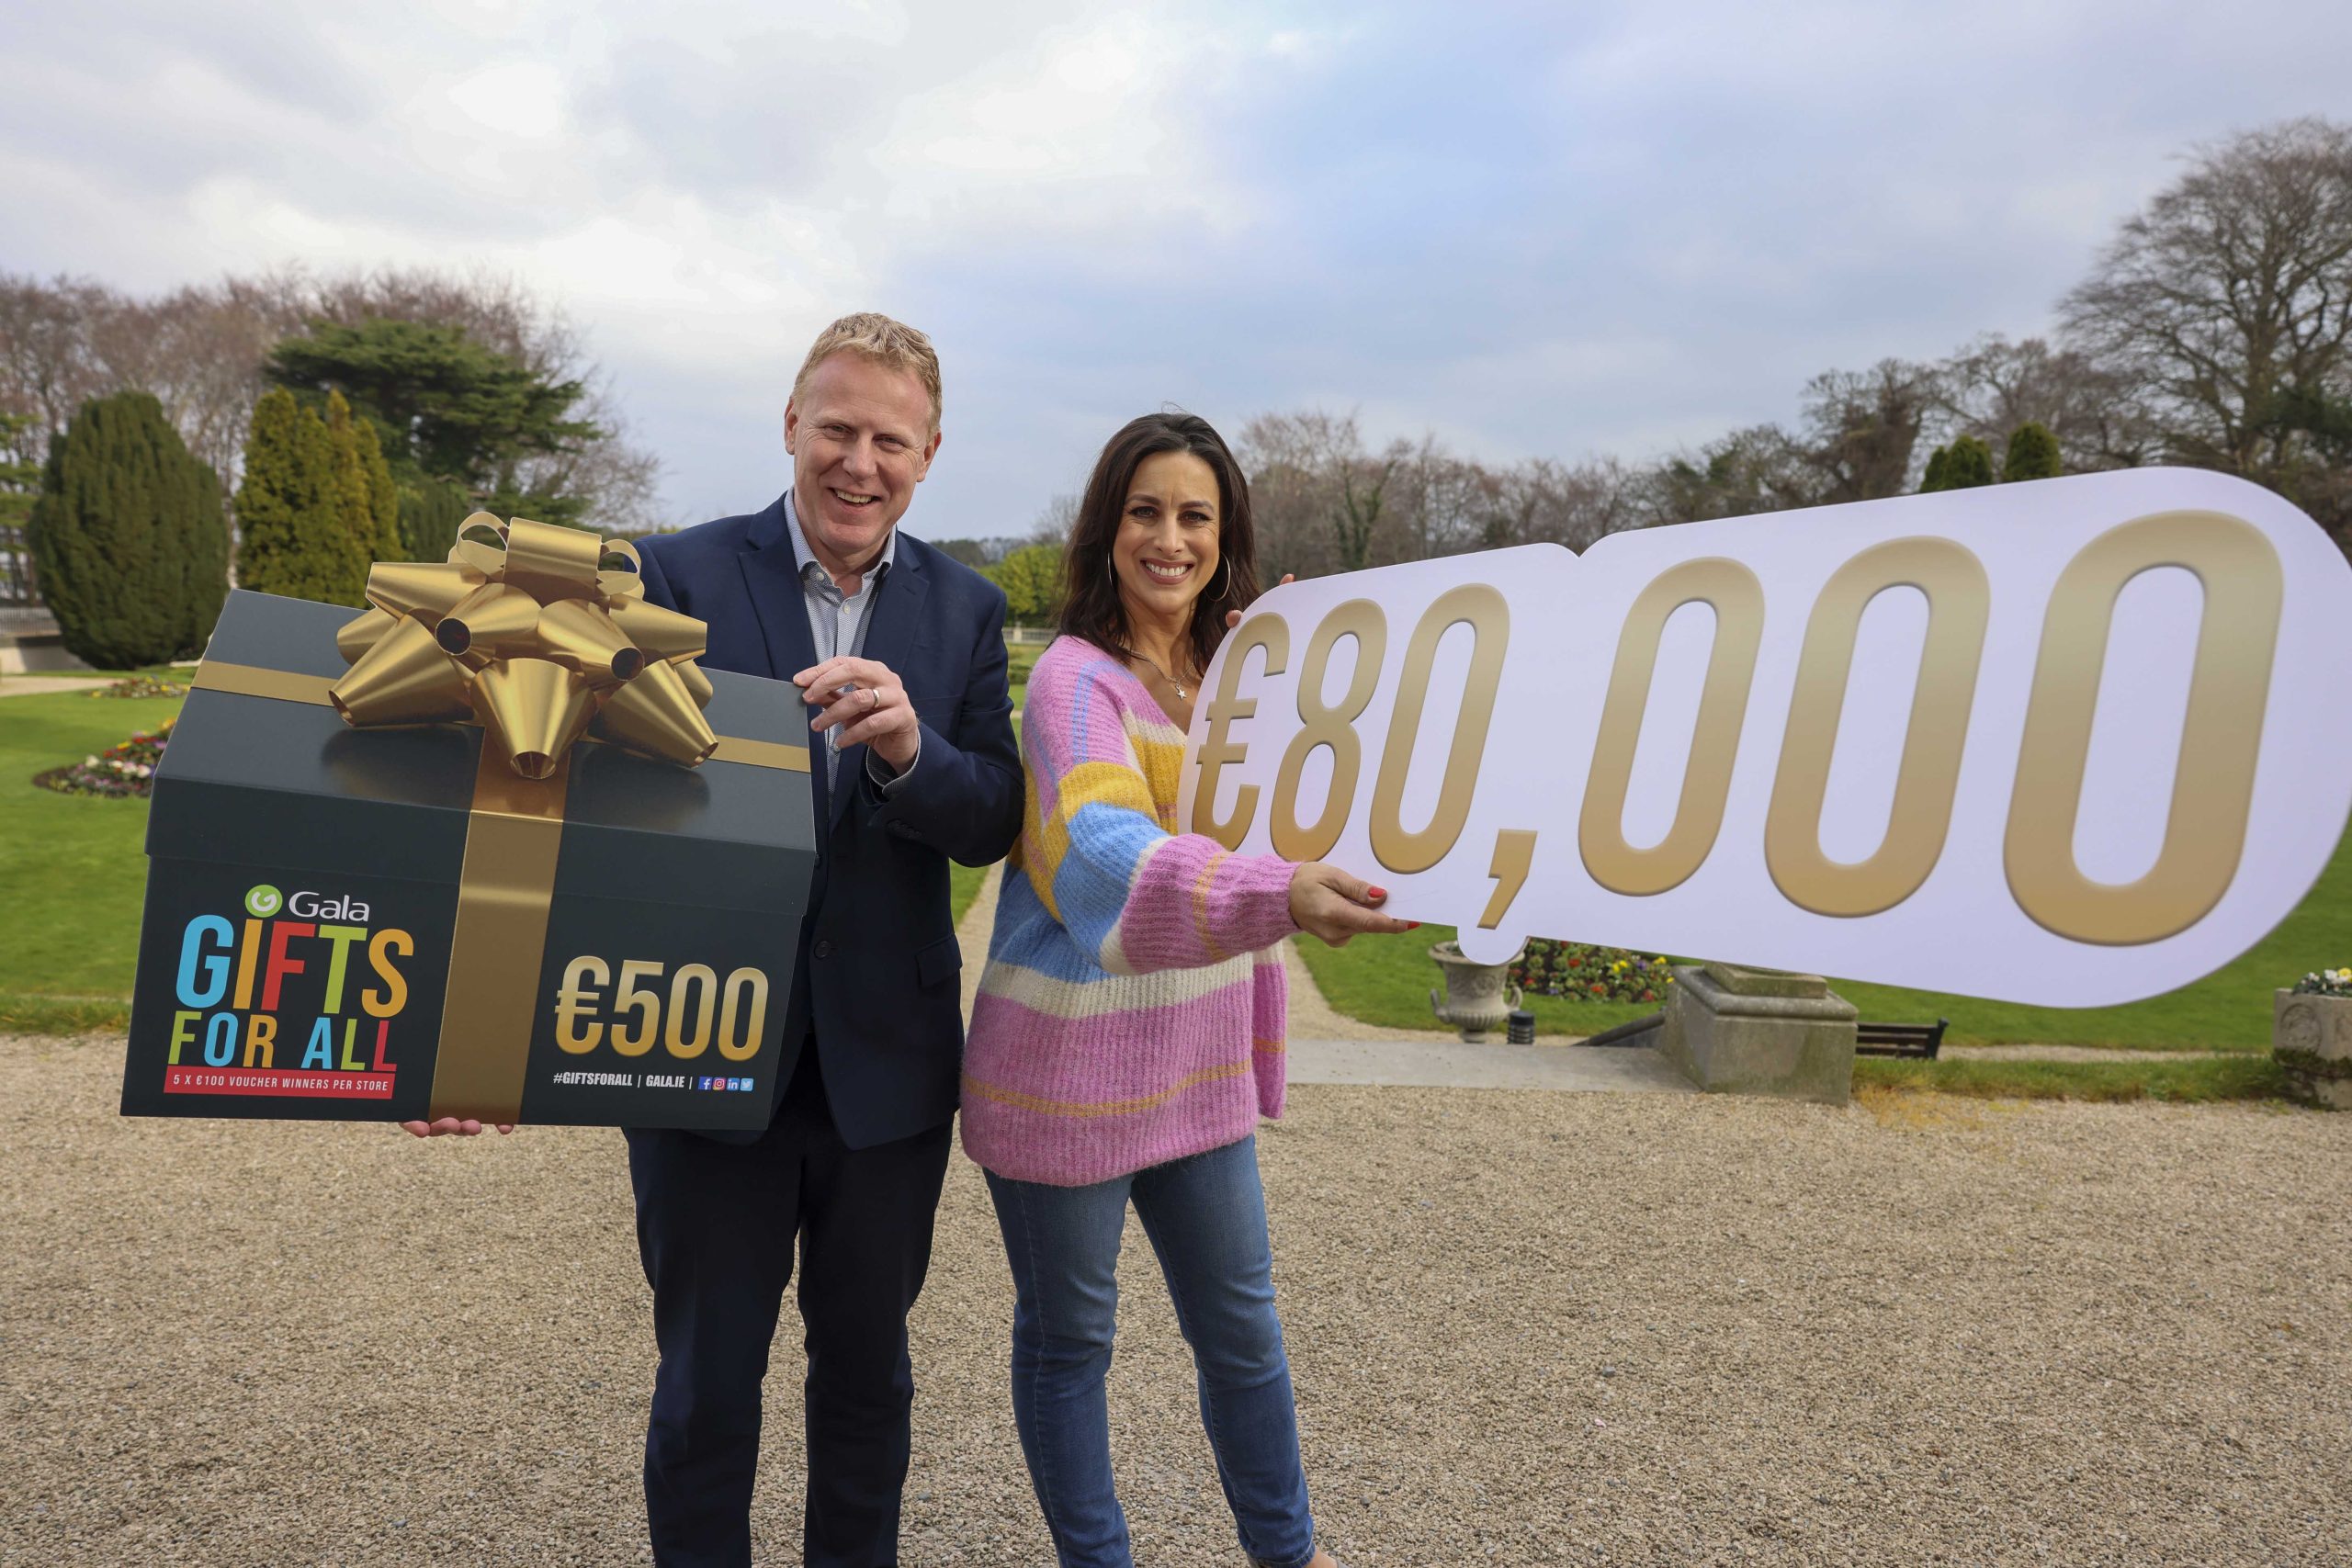 Gala Retail Announces €80,000 in Gala Gifts For All Campaign